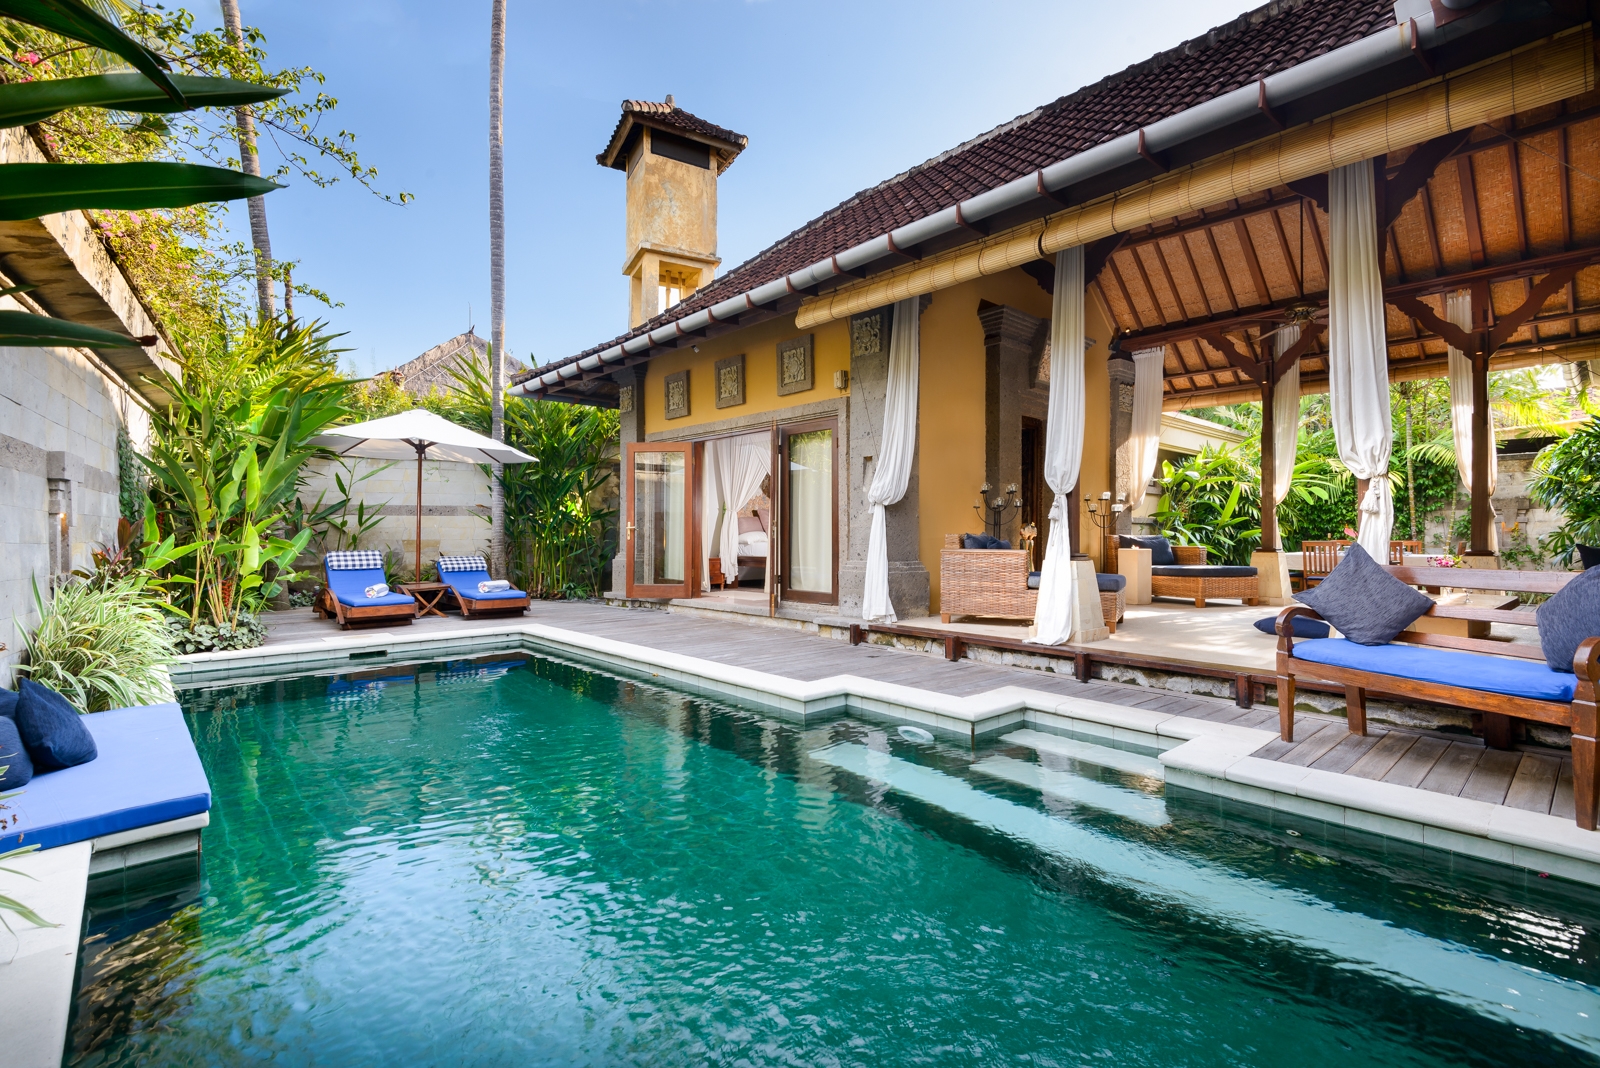 Bali has numerous options for luxury travel!